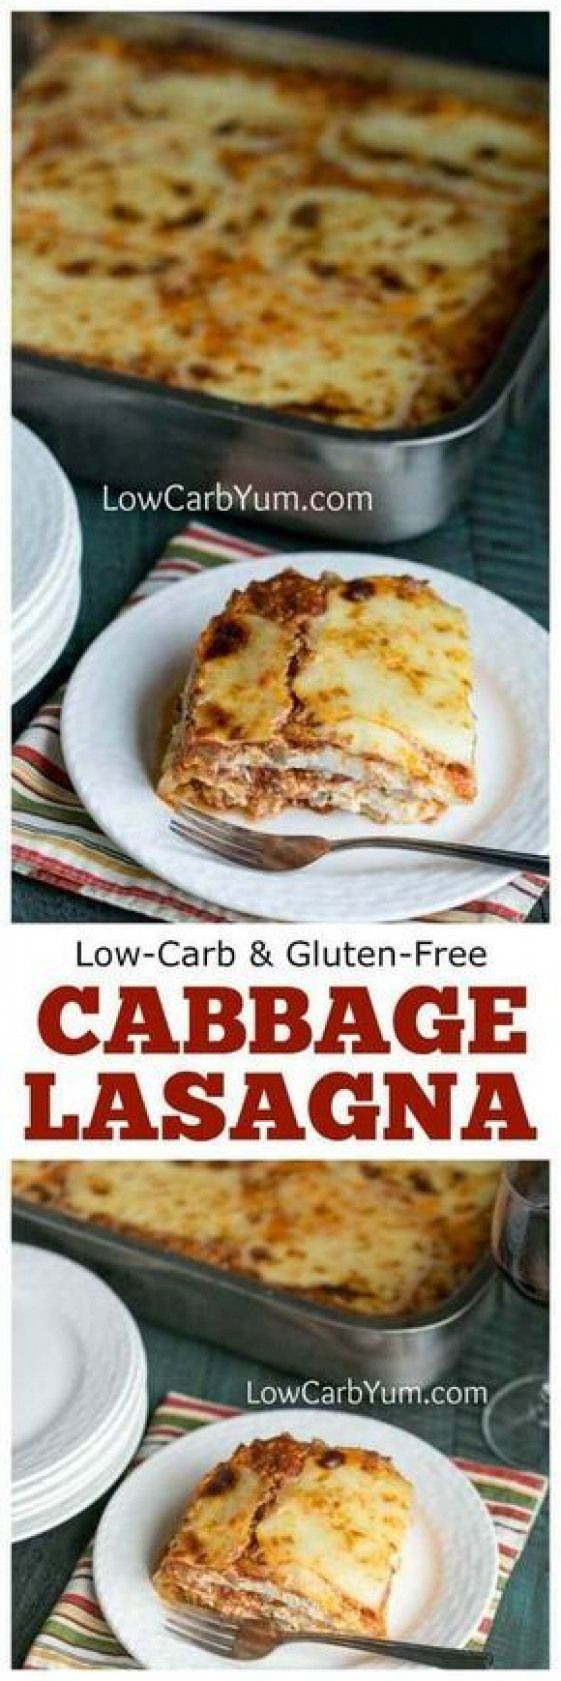 Make Lasagna Ahead Of Time
 An easy low carb dinner idea by making a delicious low